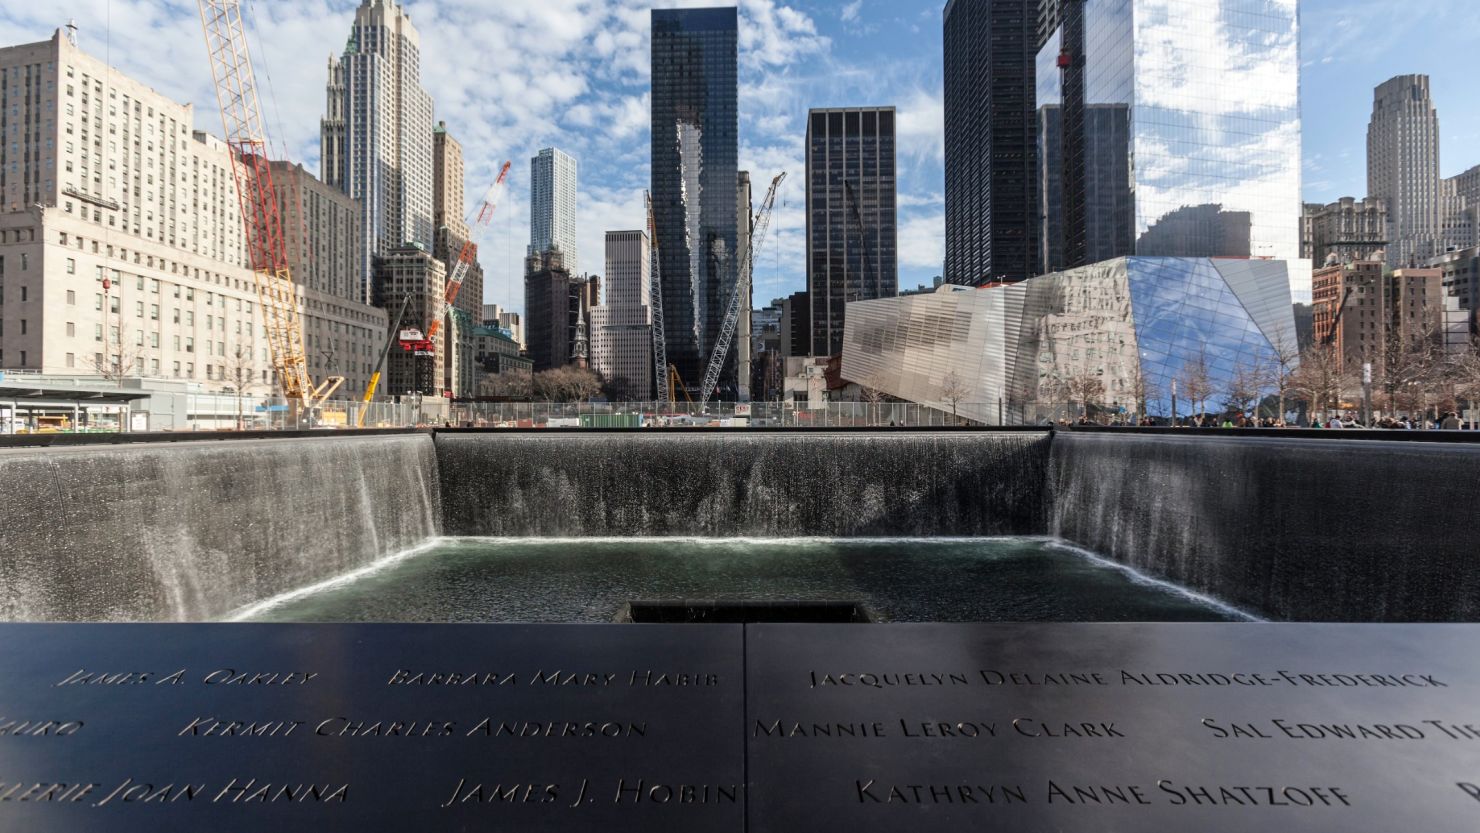 Twin reflecting pools at the 9/11 Memorial mark the footprints of the original World Trade Center towers.